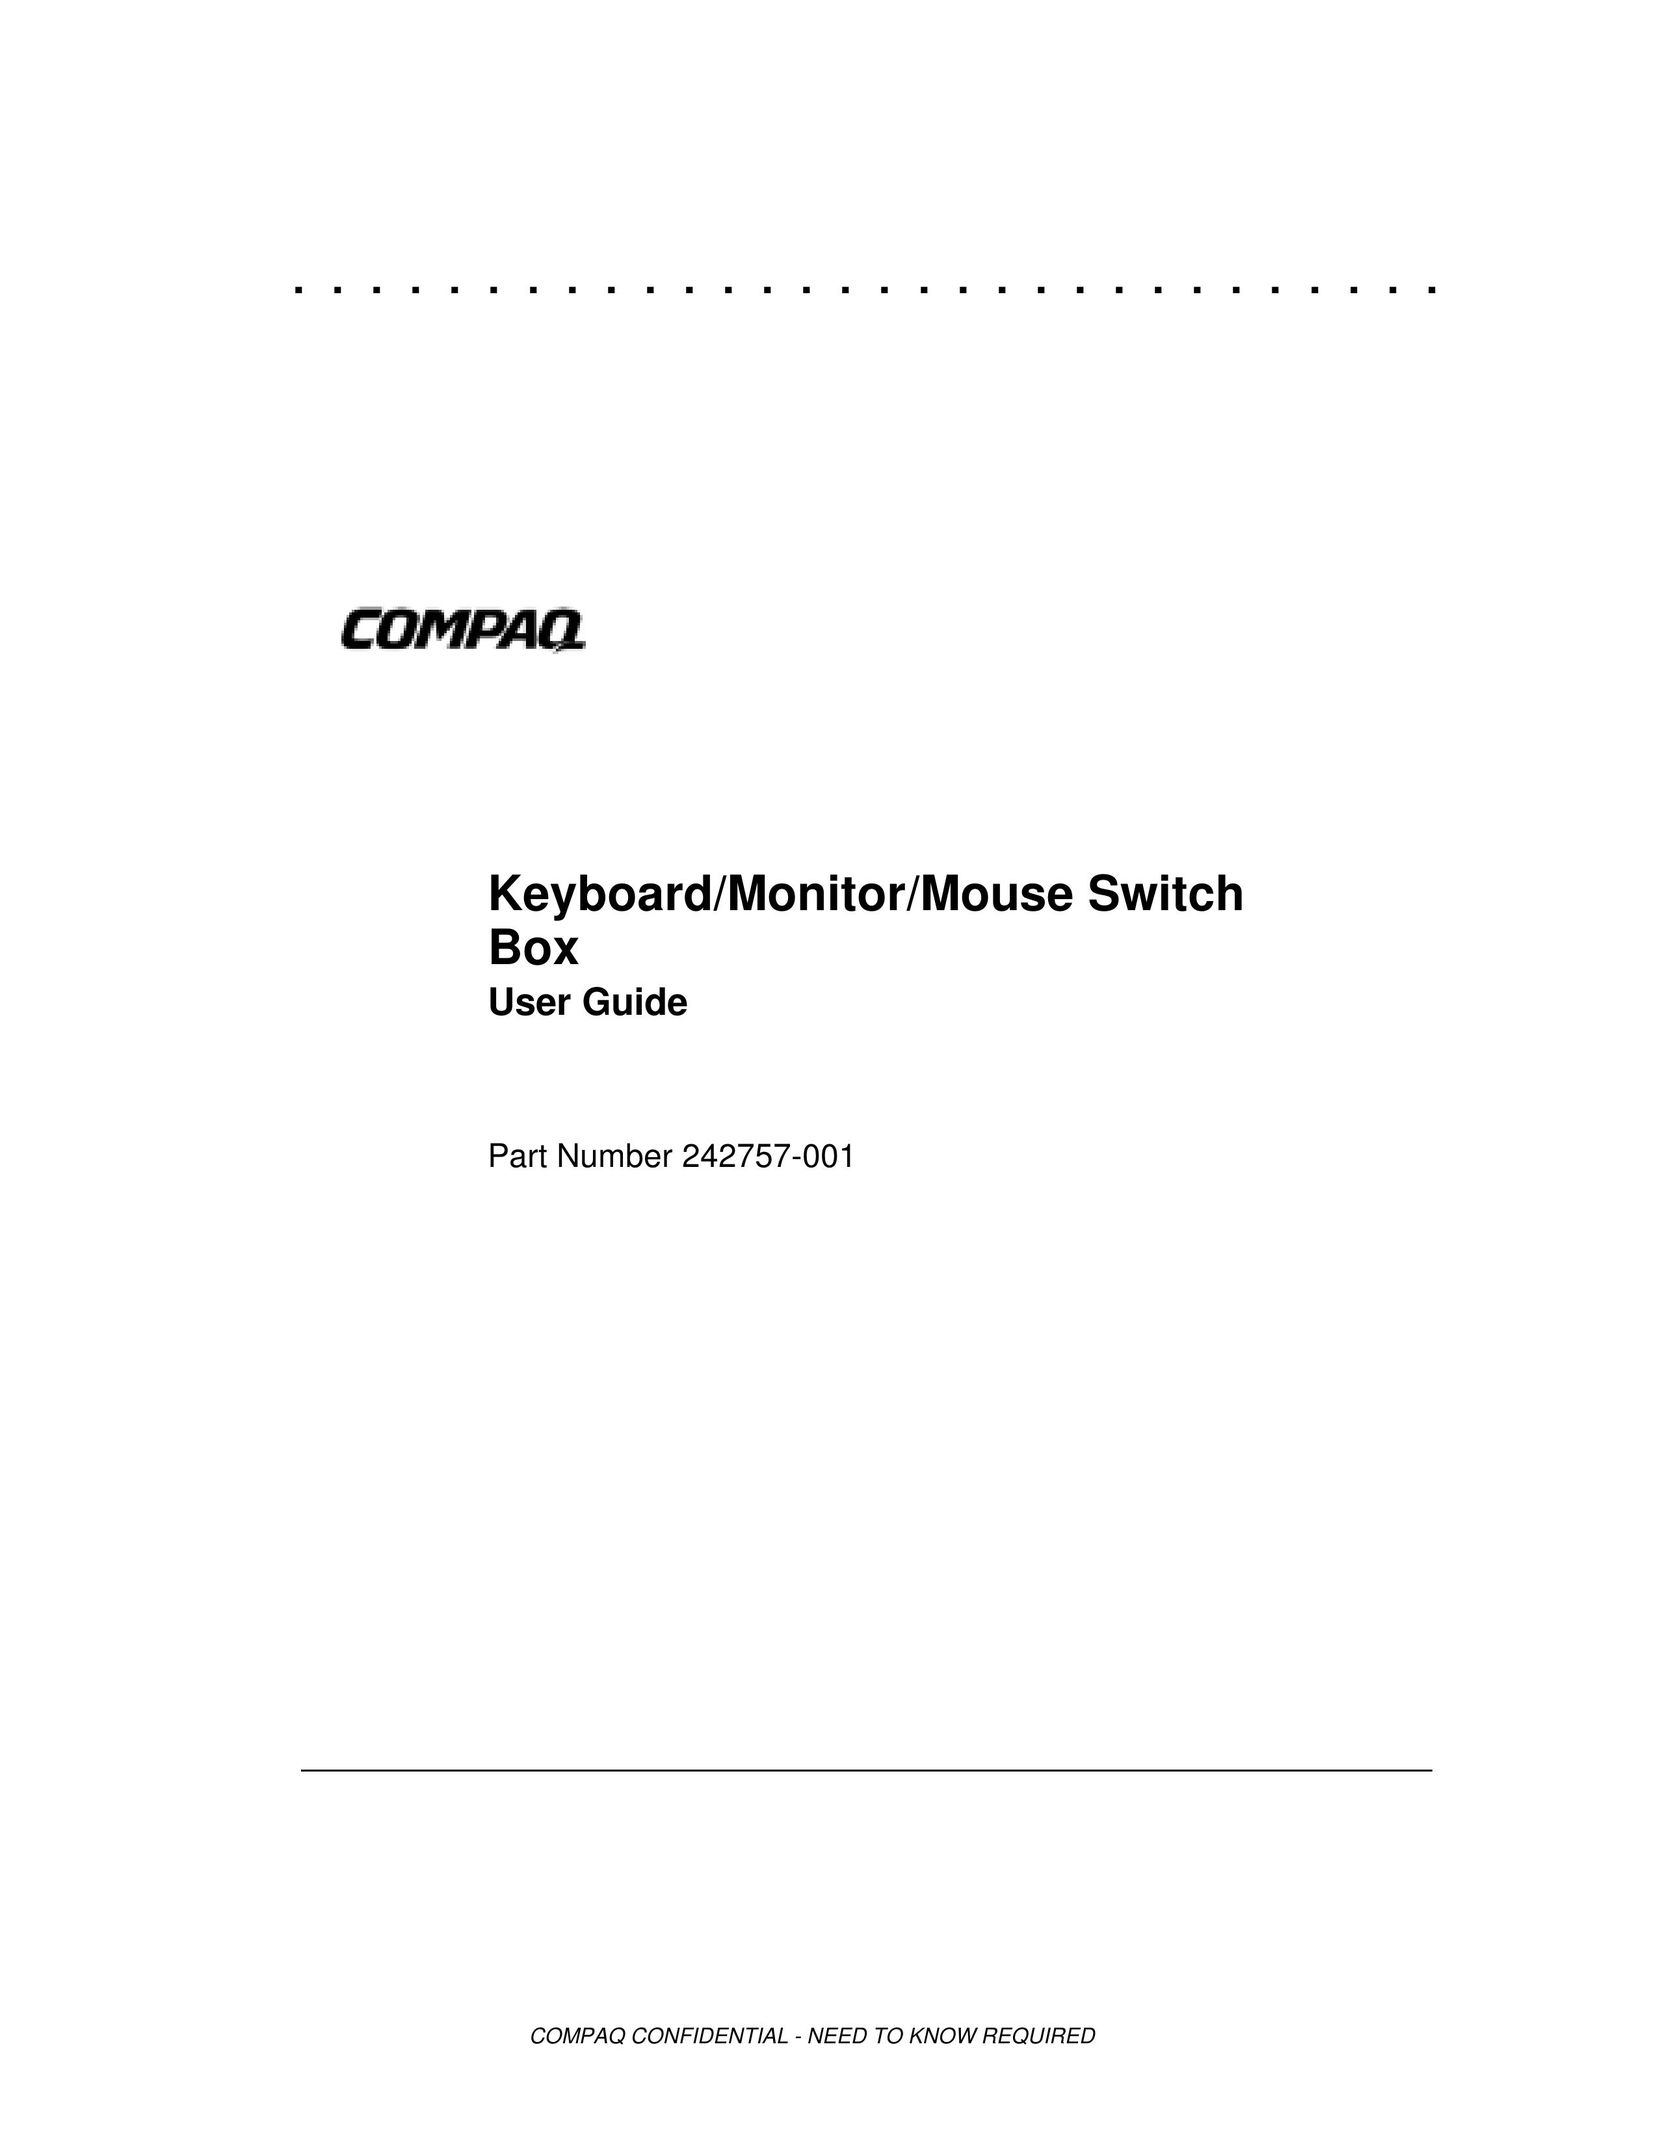 Compaq Keyboard/Monitor/Mouse Switch Box Mouse User Manual